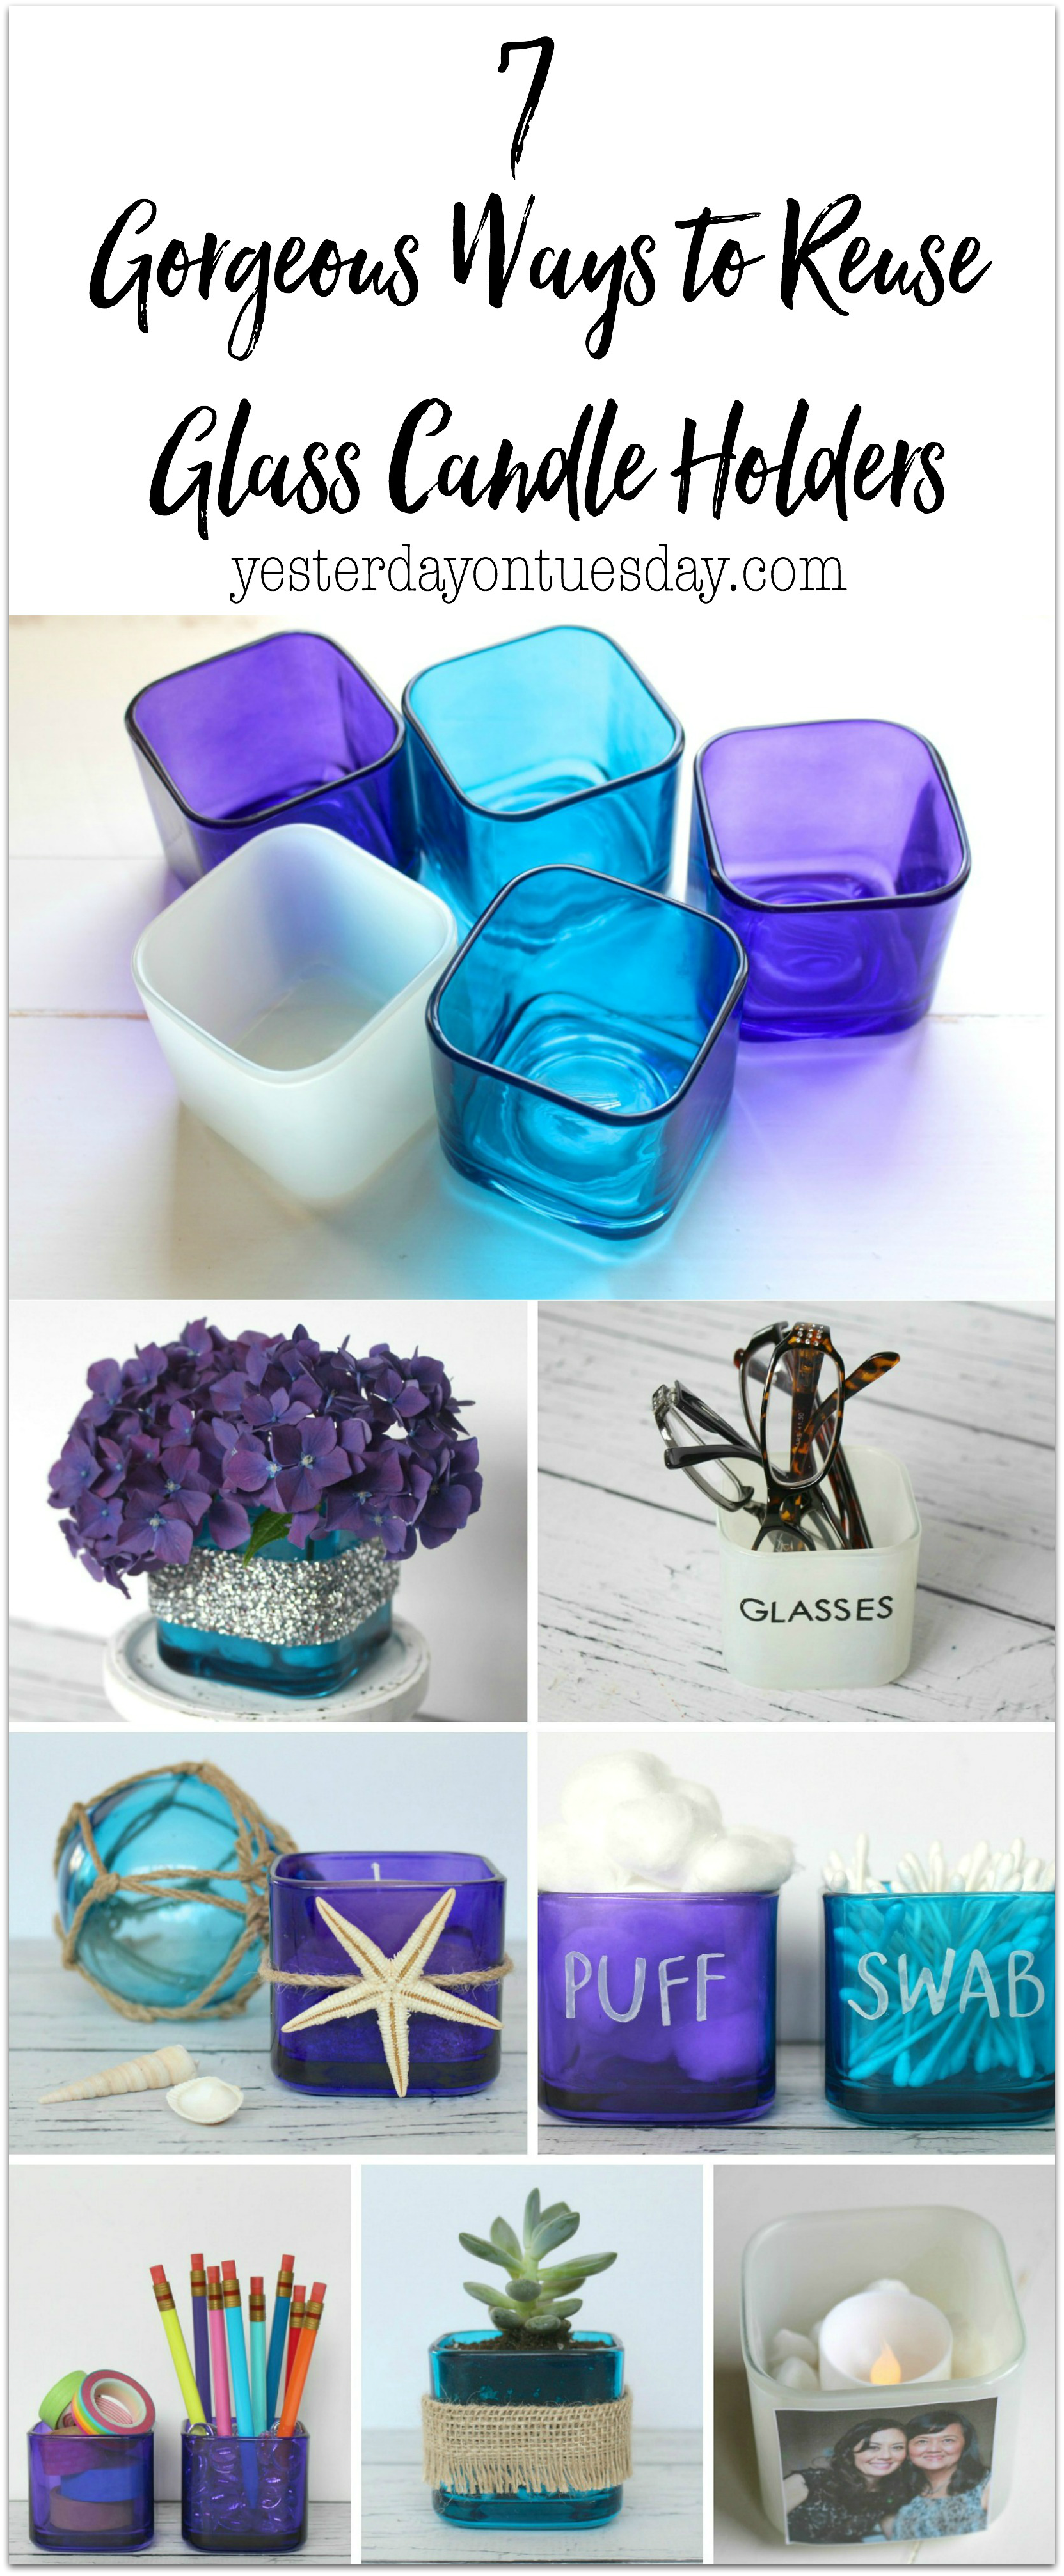 7 Gorgeous Ways to Reuse Glass Candle Holders